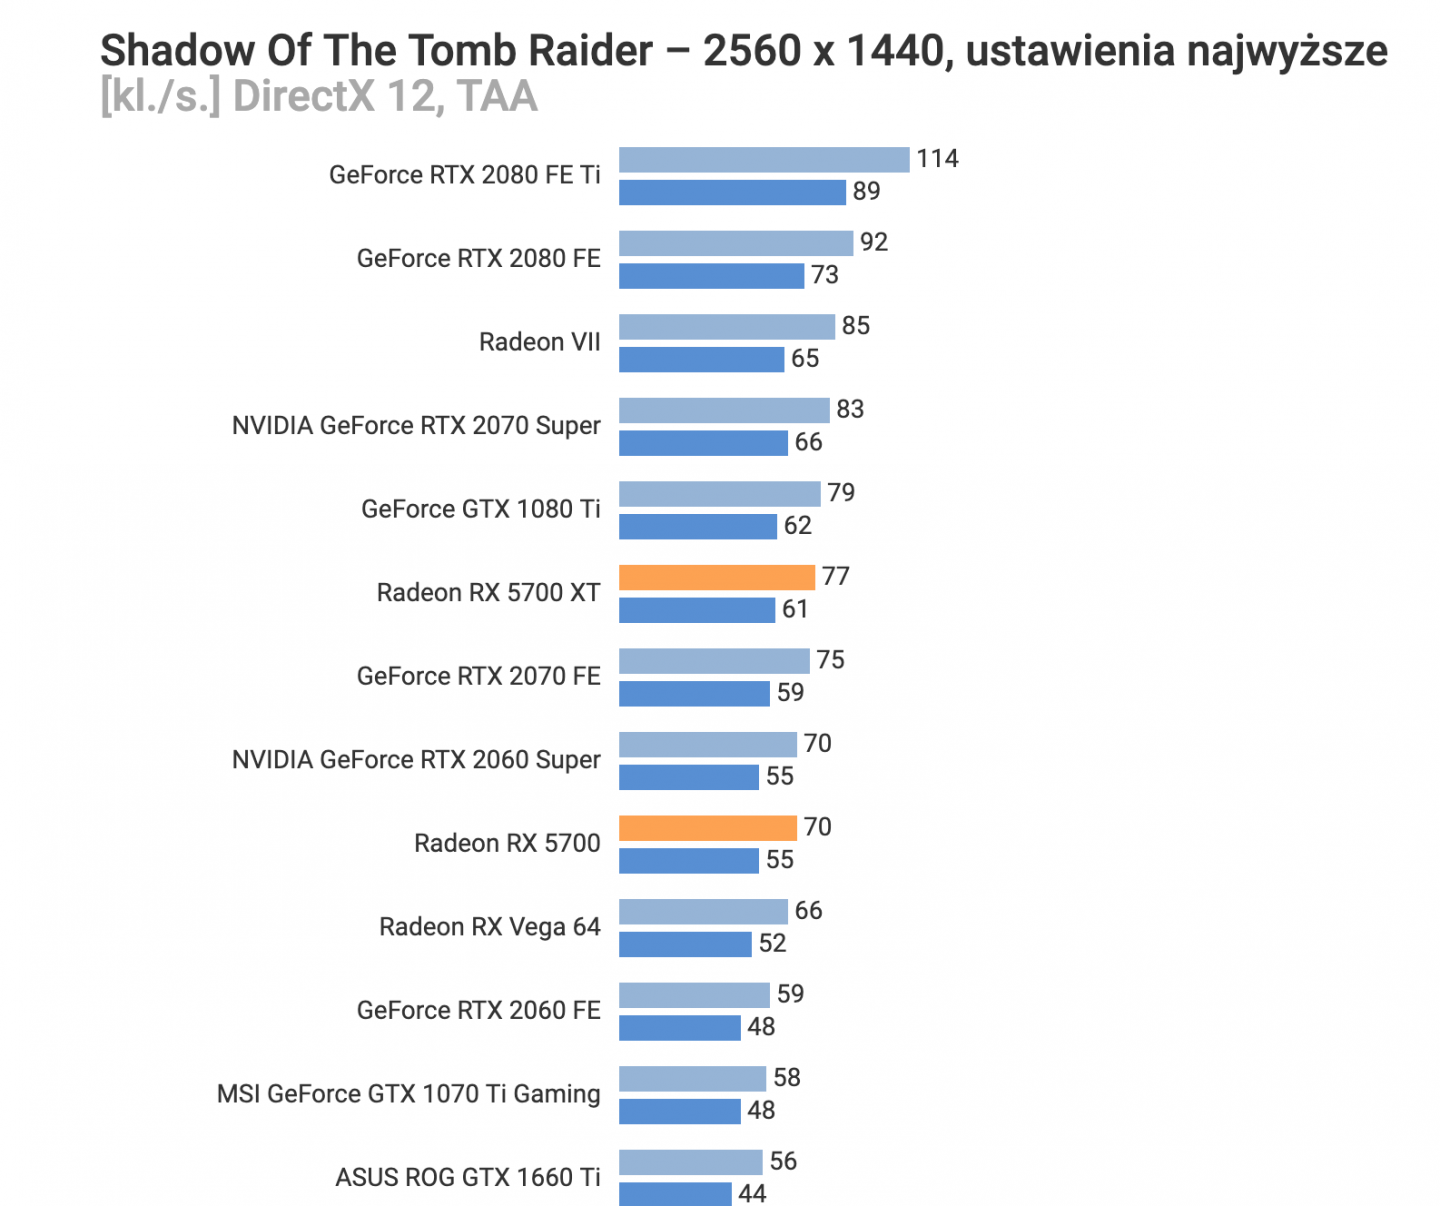 Media asset in full size related to 3dfxzone.it news item entitled as follows: Leaked Benchmarks: AMD Radeon RX 5700 Series vs NVIDIA GeForce RTX 20XX | Image Name: news29757_AMD-Radeon-5700-Series-Benchmark_3.png